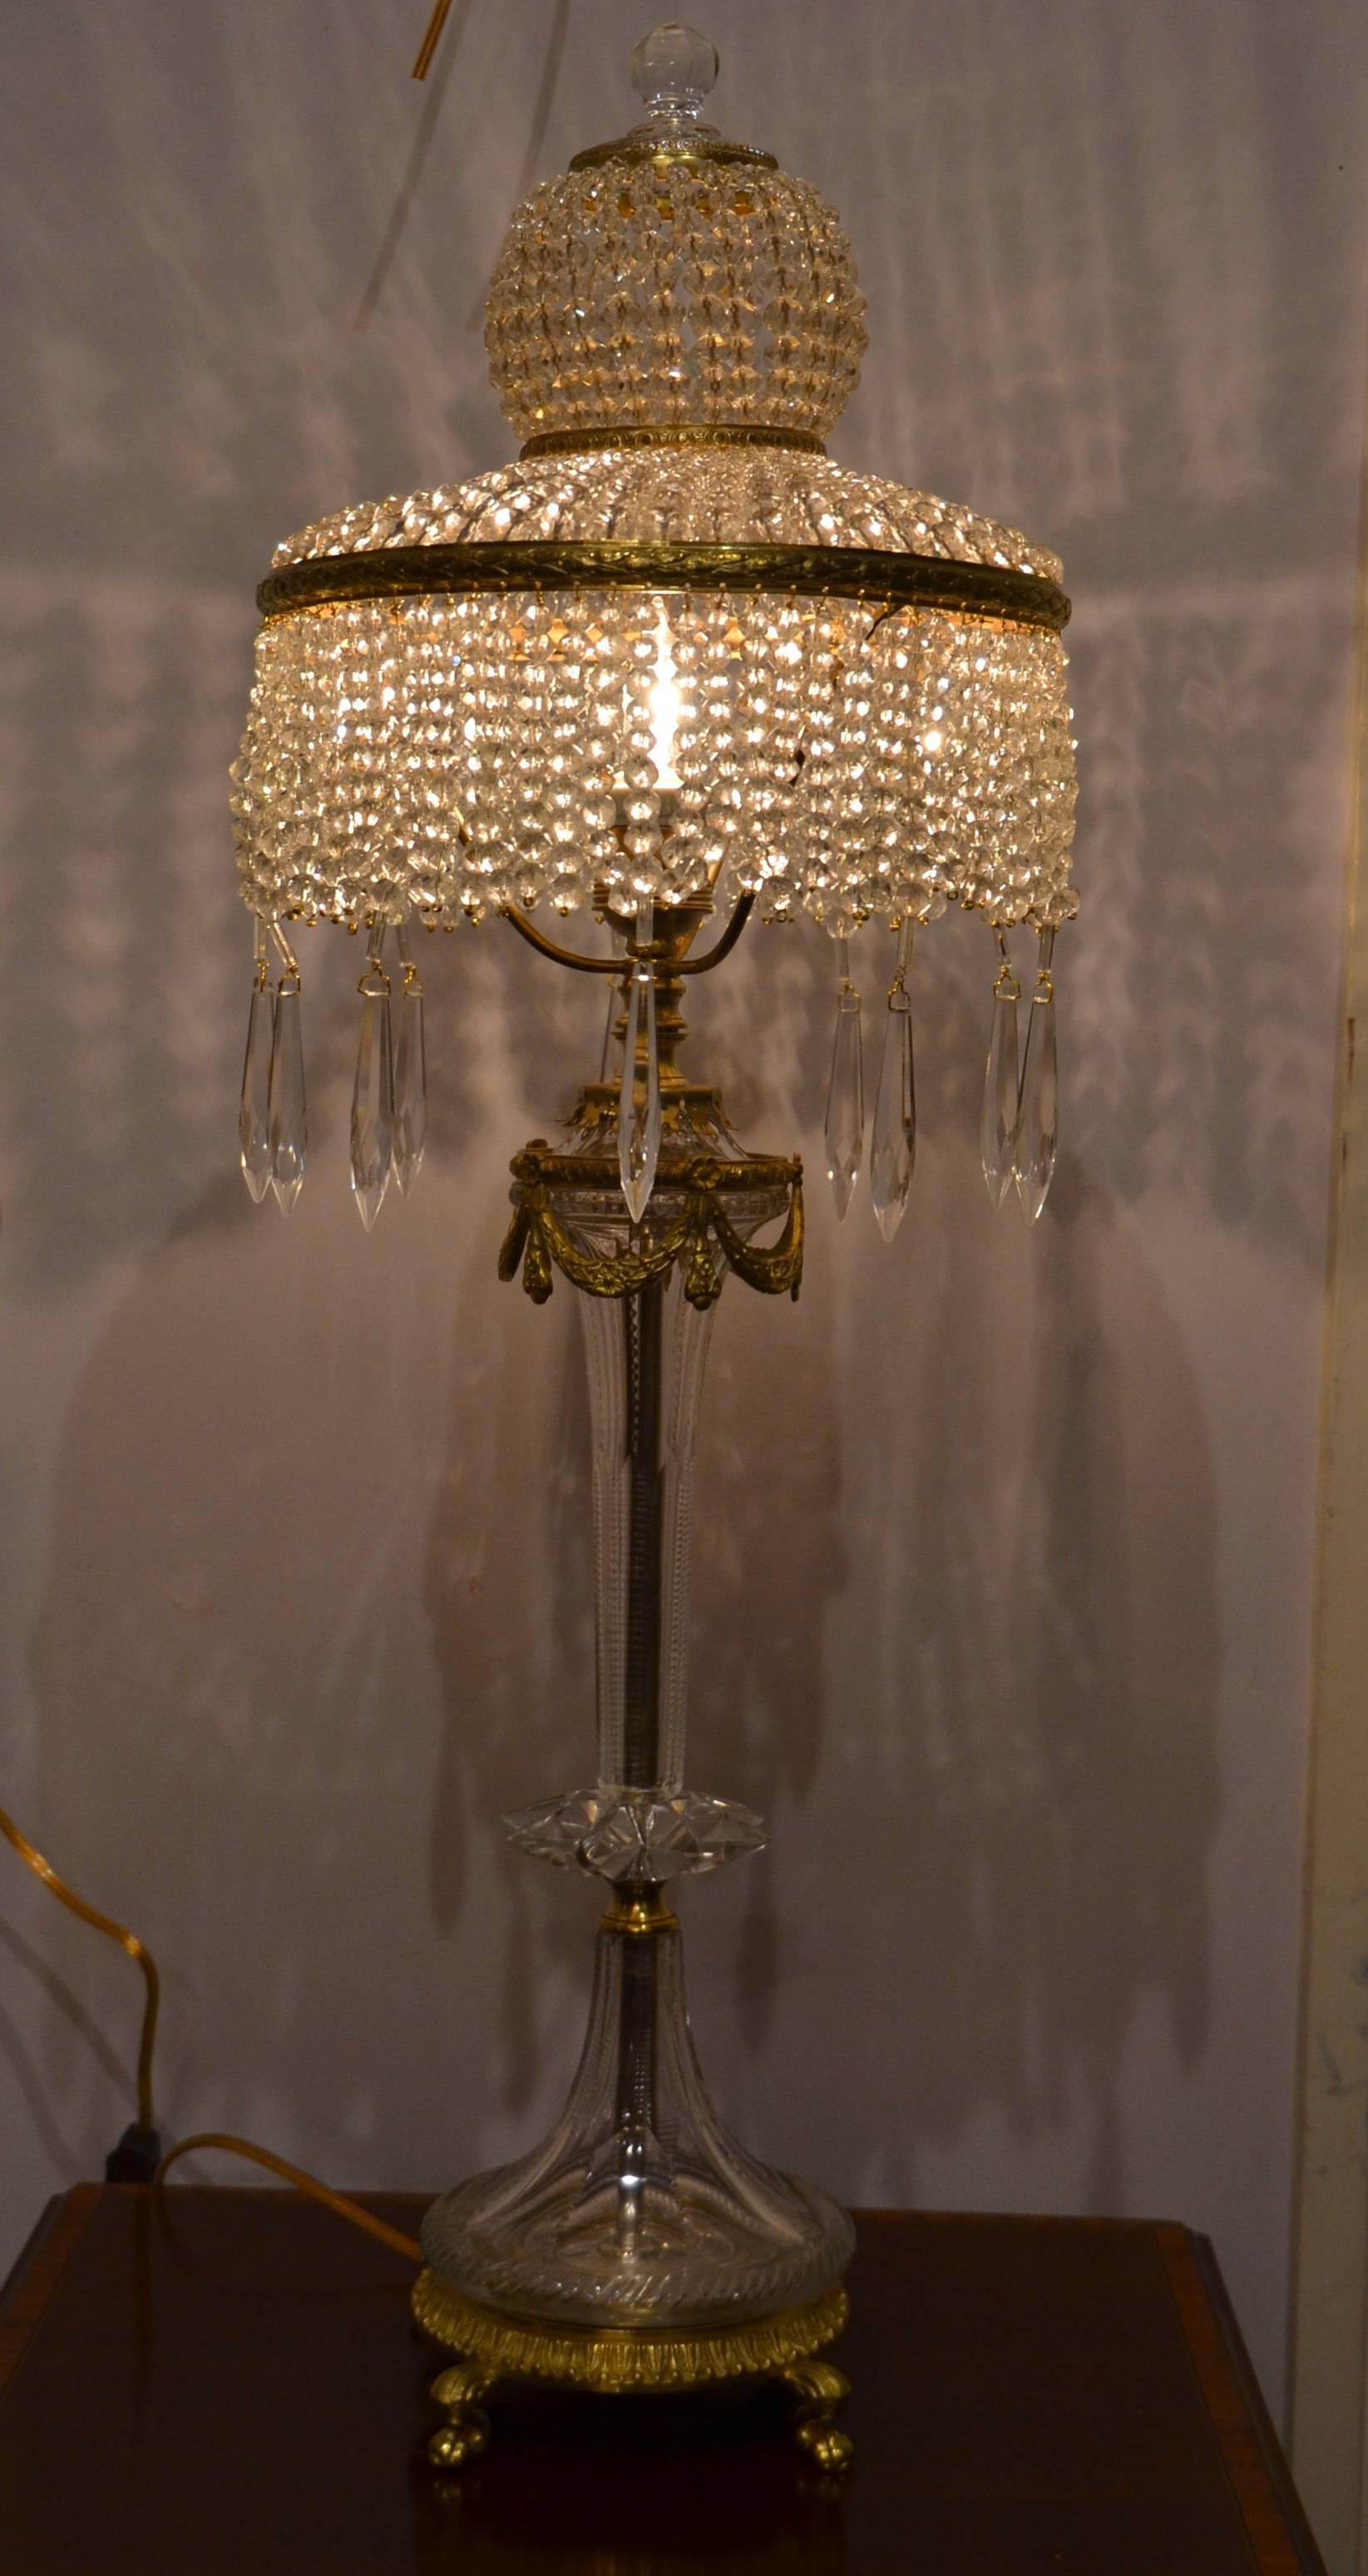 Pair of antique French crystal and bronze lamps, circa 1920.